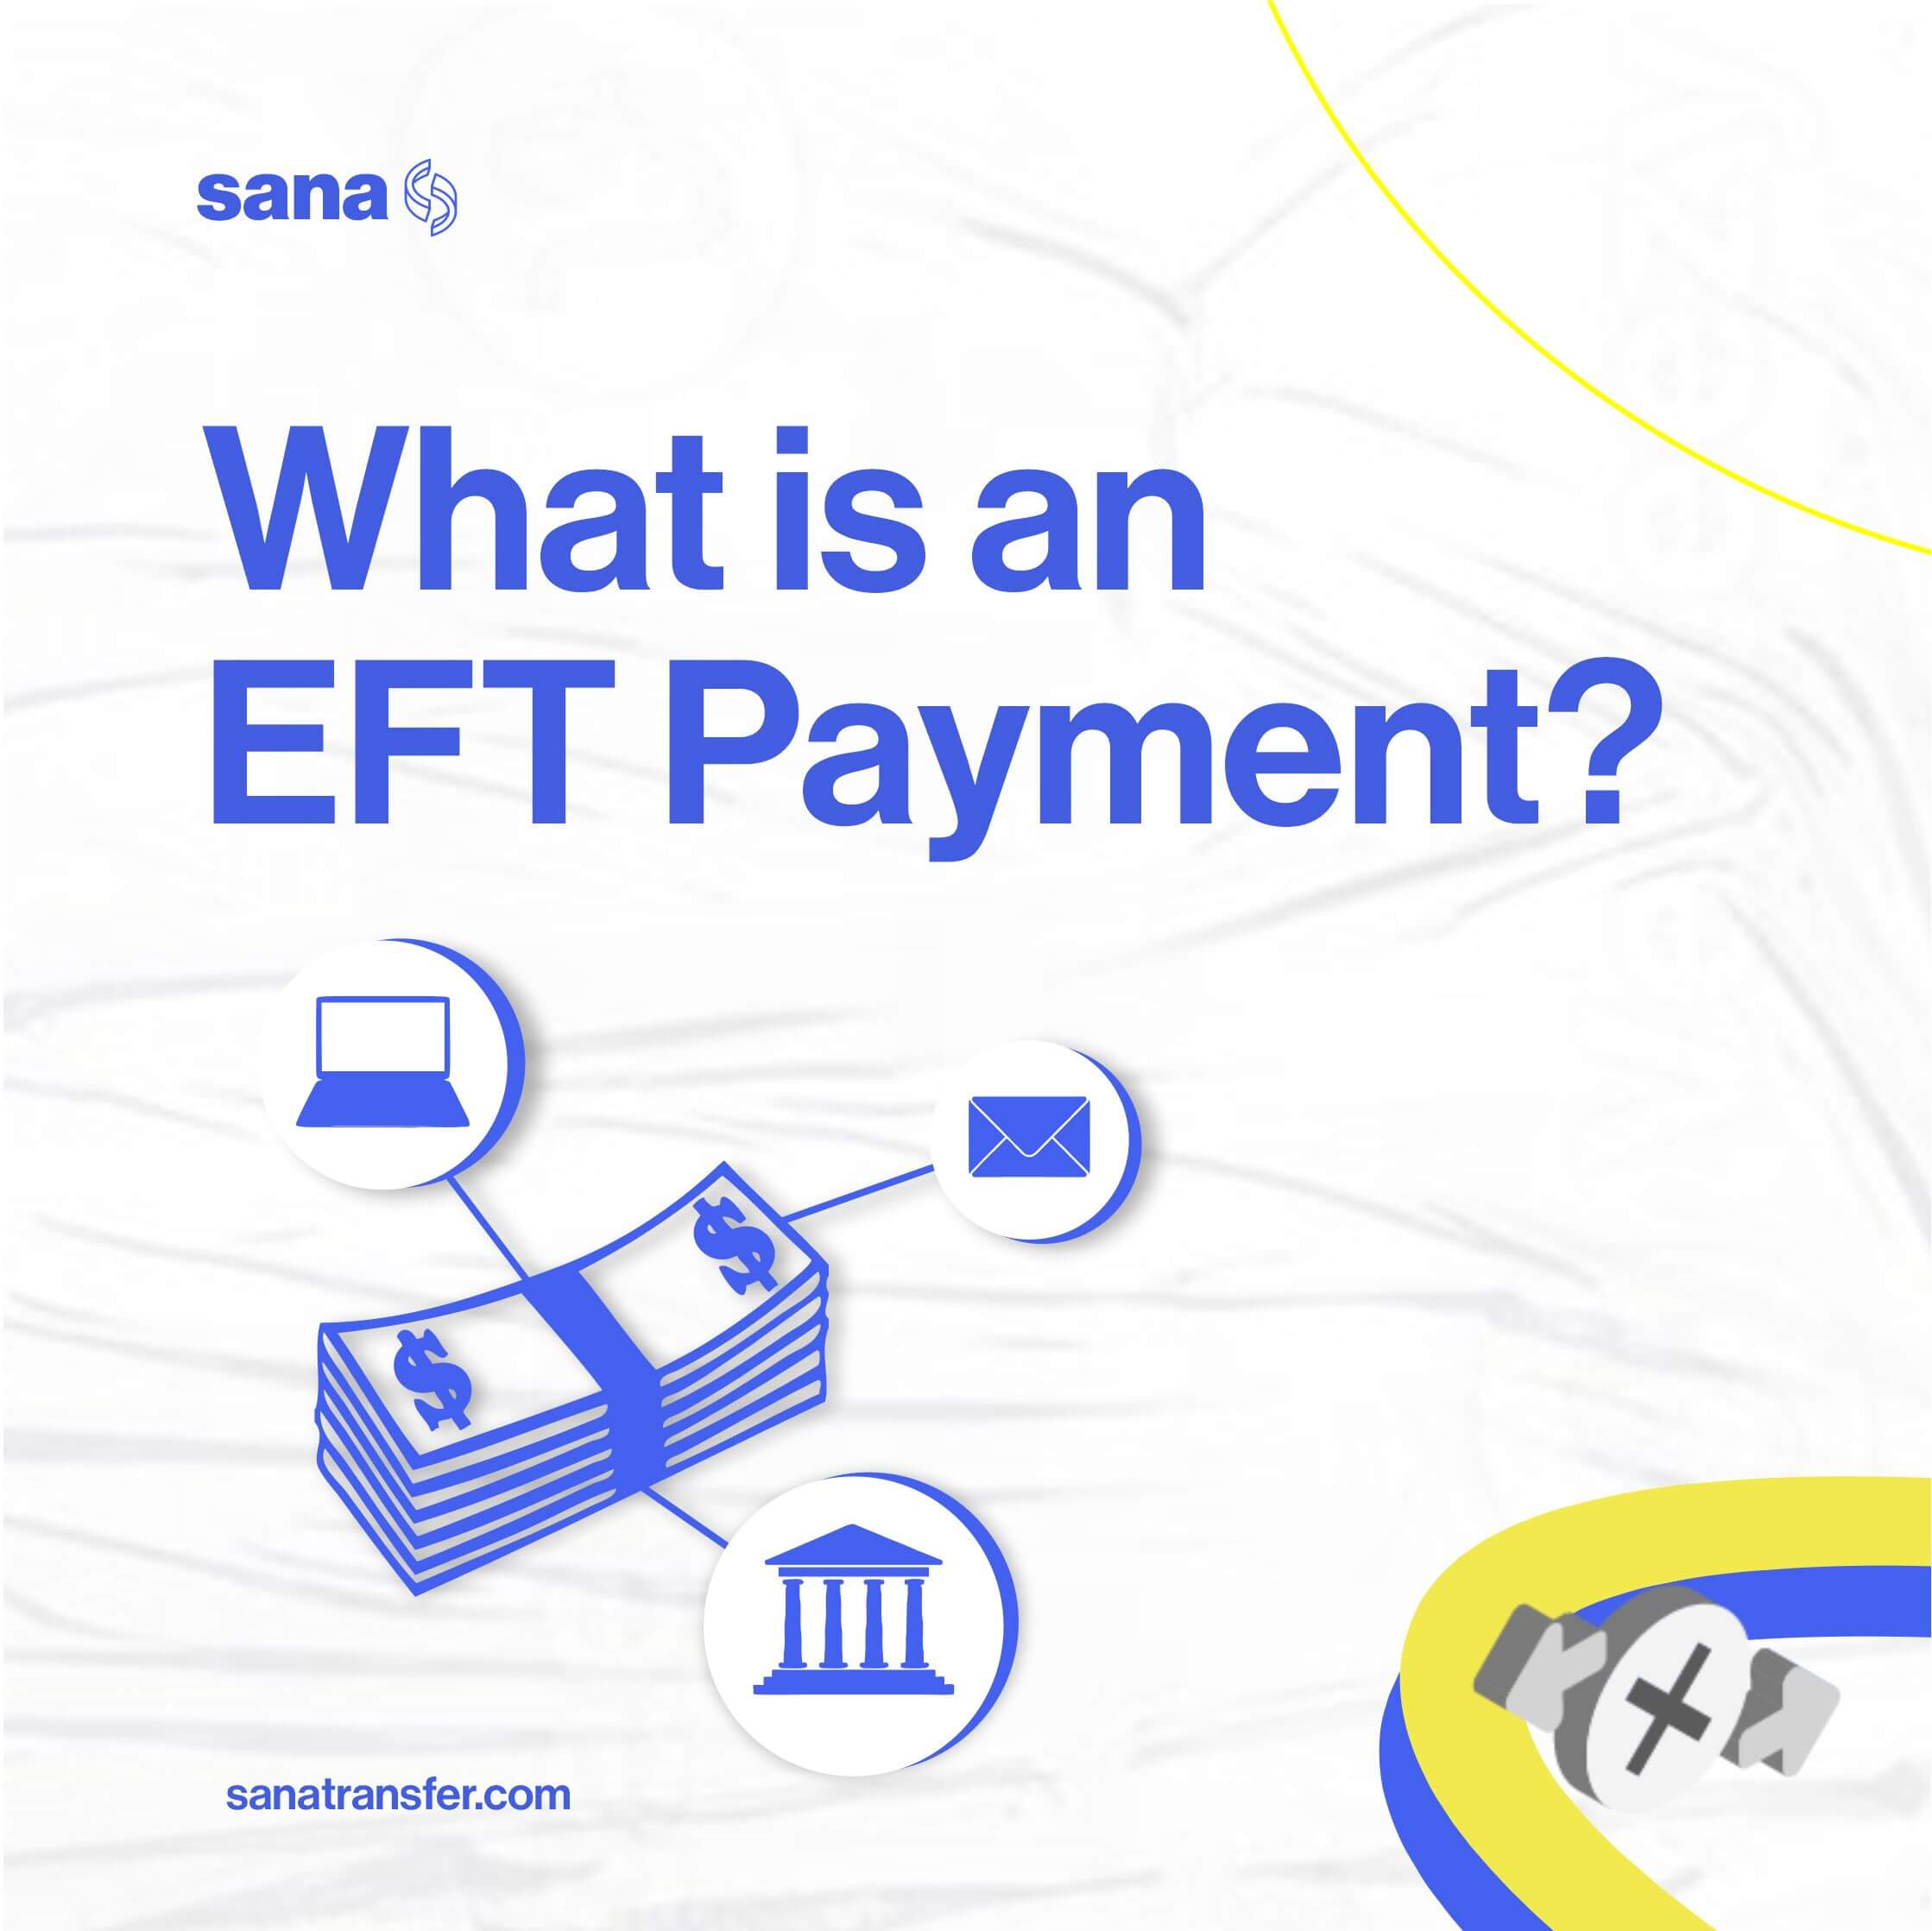 What is an EFT Payment?